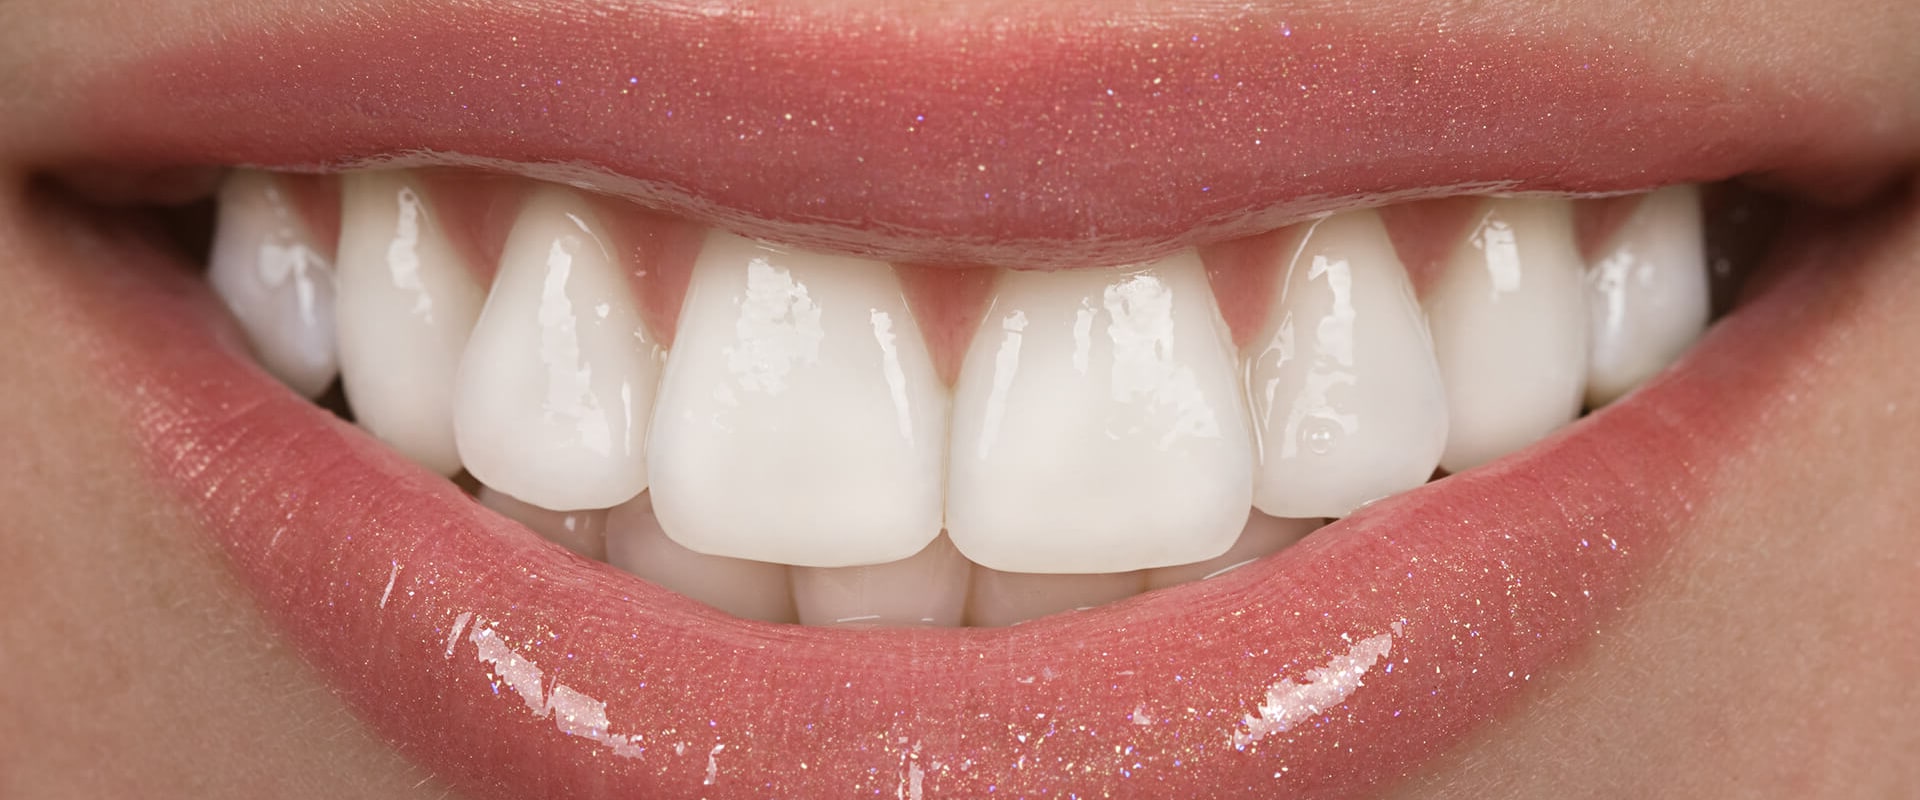 Dental Veneers In Spring, TX: A Guide To Transform Your Smile With Porcelain